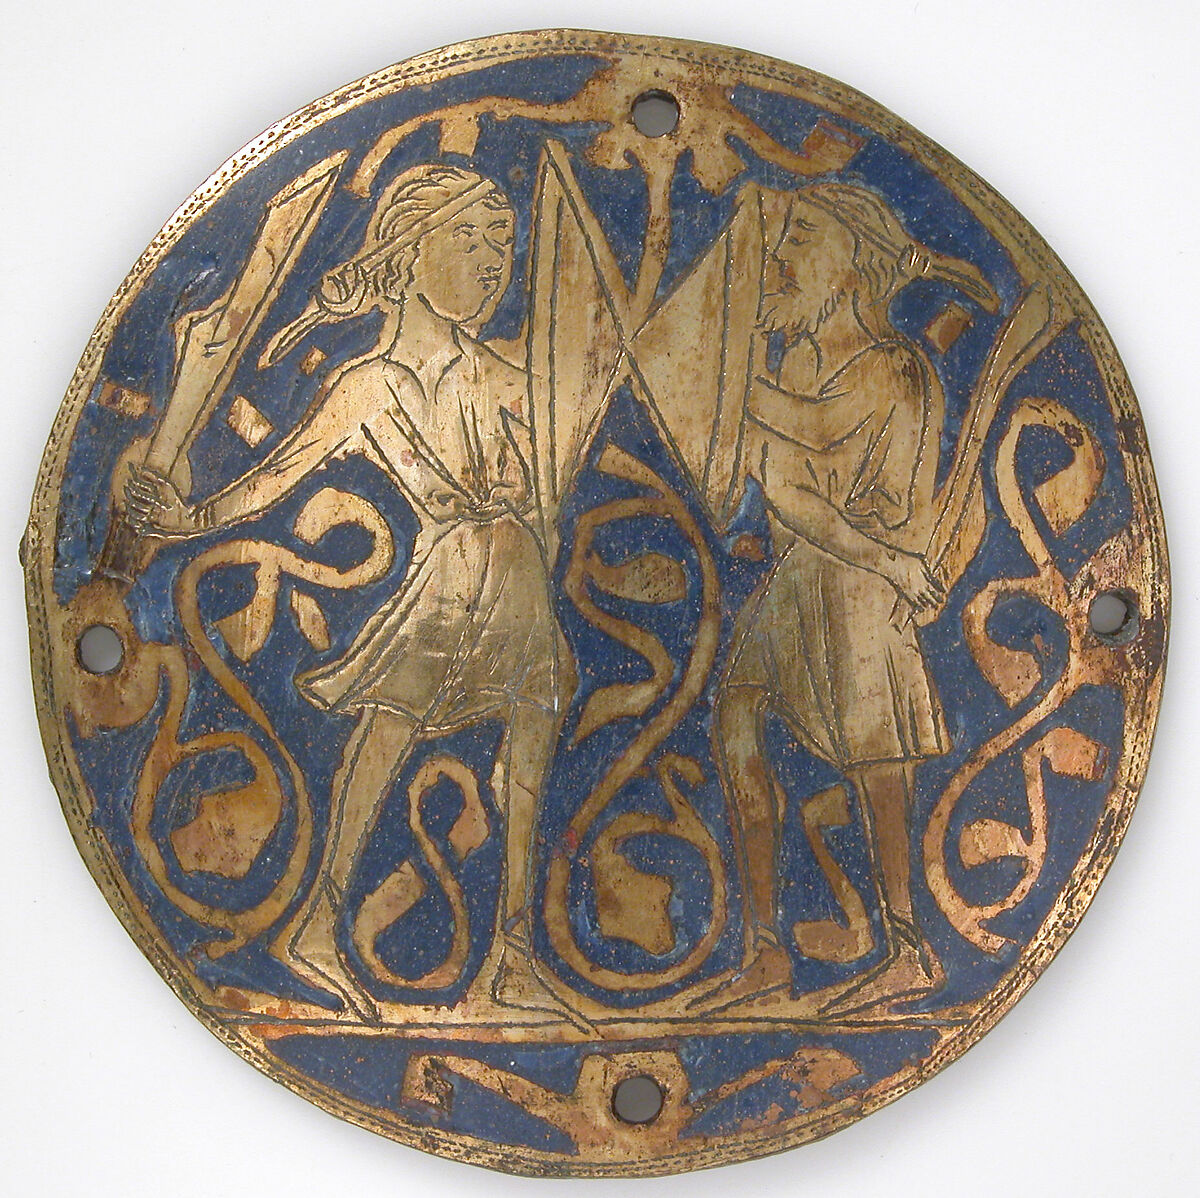 Medallion with Two Warriors, One Bearded, with Swords and Bucklers, Copper: engraved and gilt; champlevé enamel: medium and light blue and white, French 